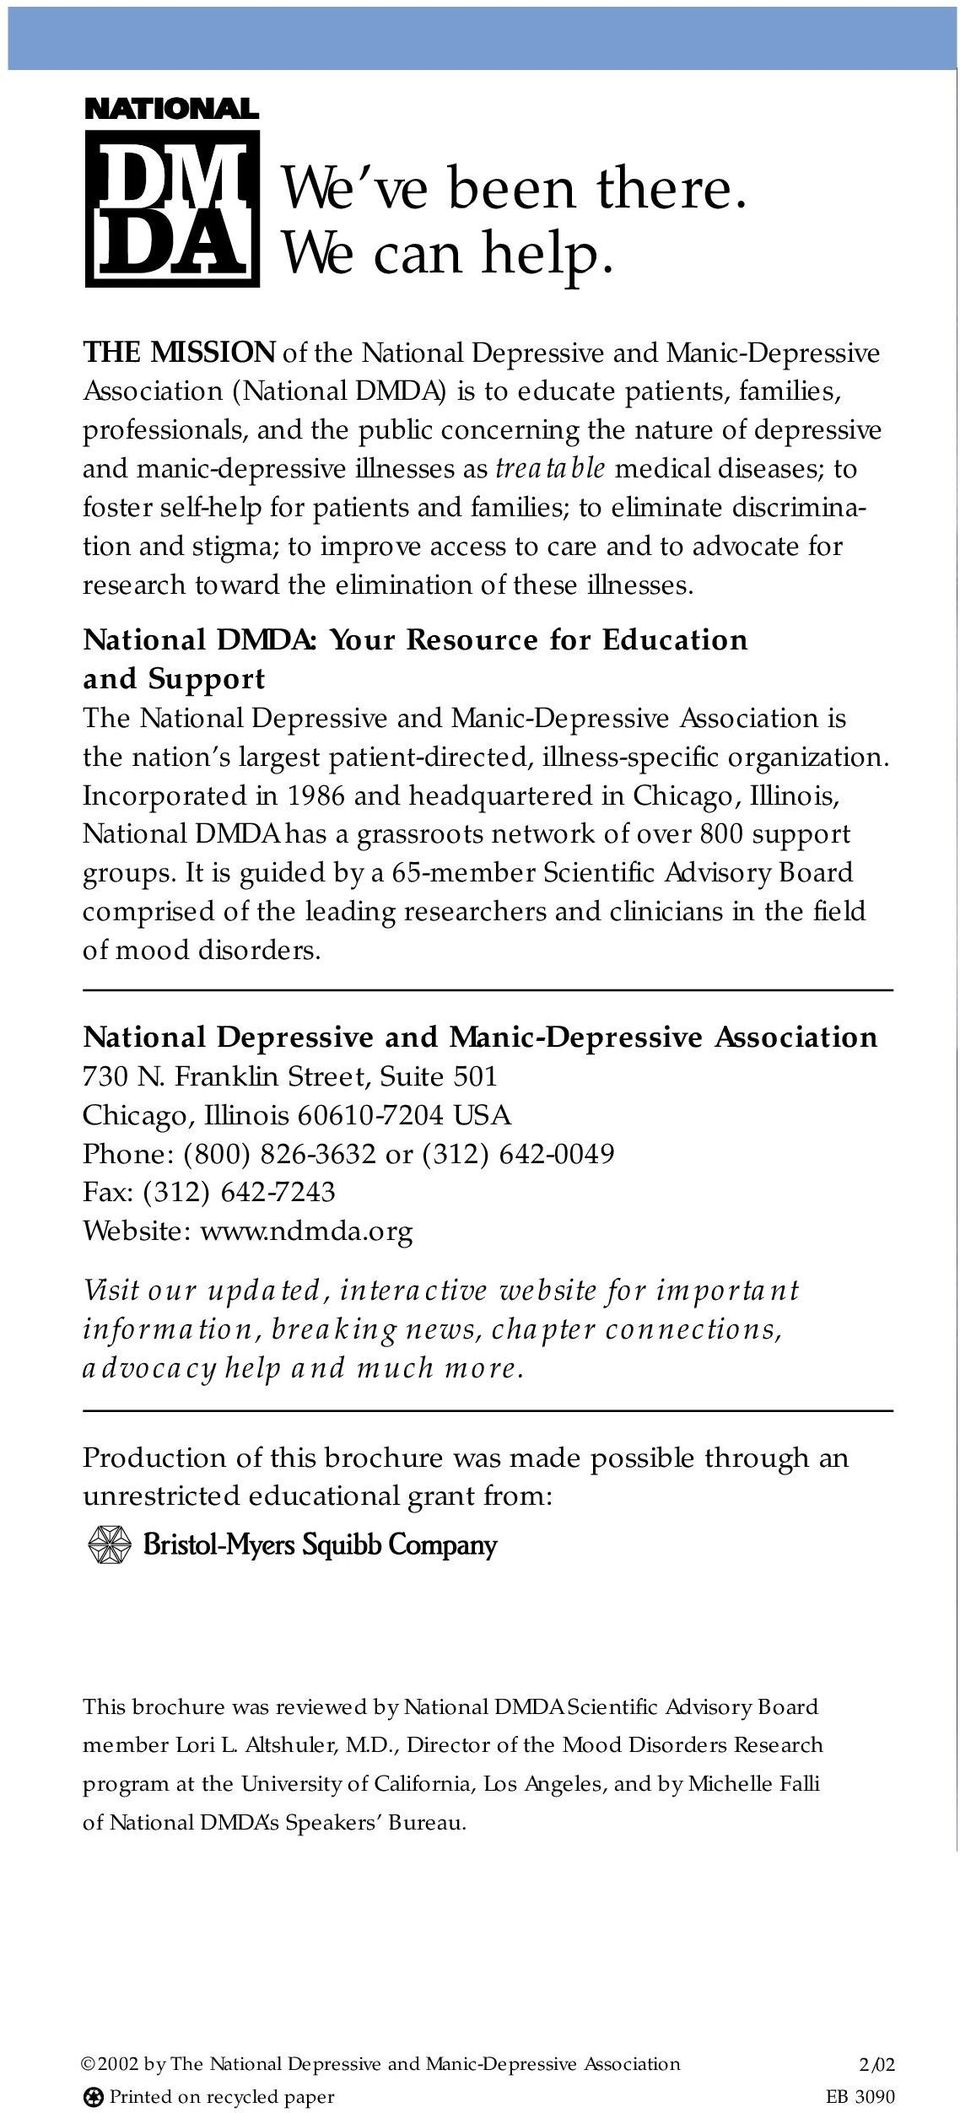 manic-depressive illnesses as treatable medical diseases; to foster self-help for patients and families; to eliminate discrimination and stigma; to improve access to care and to advocate for research